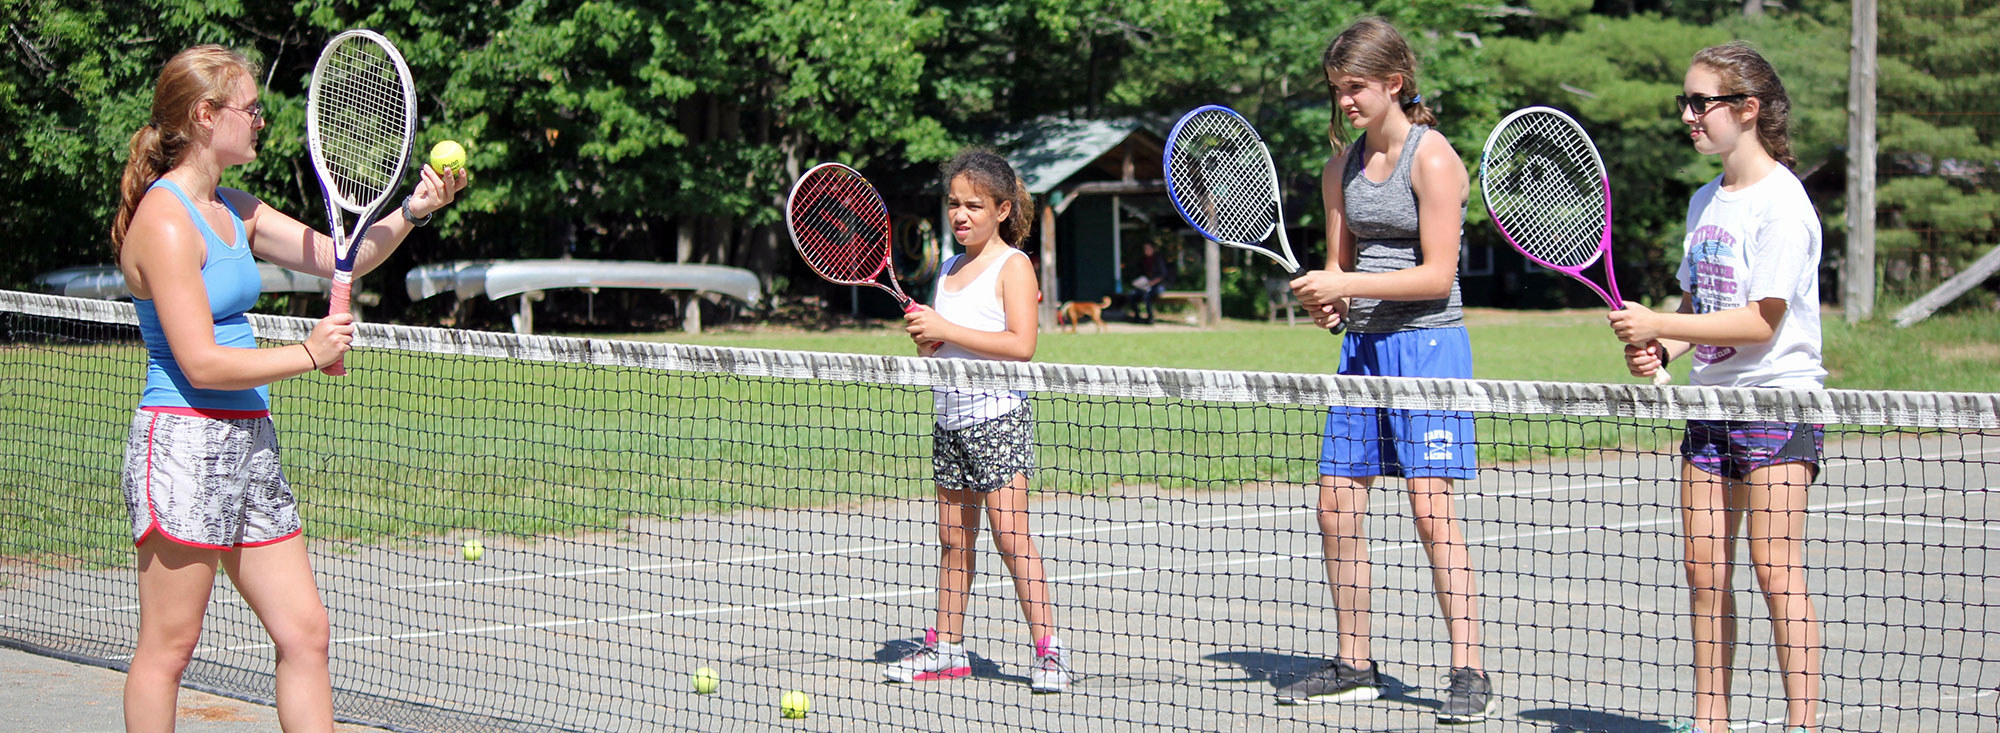 Whippoorwill  Campers and Counselor On Tennis Court